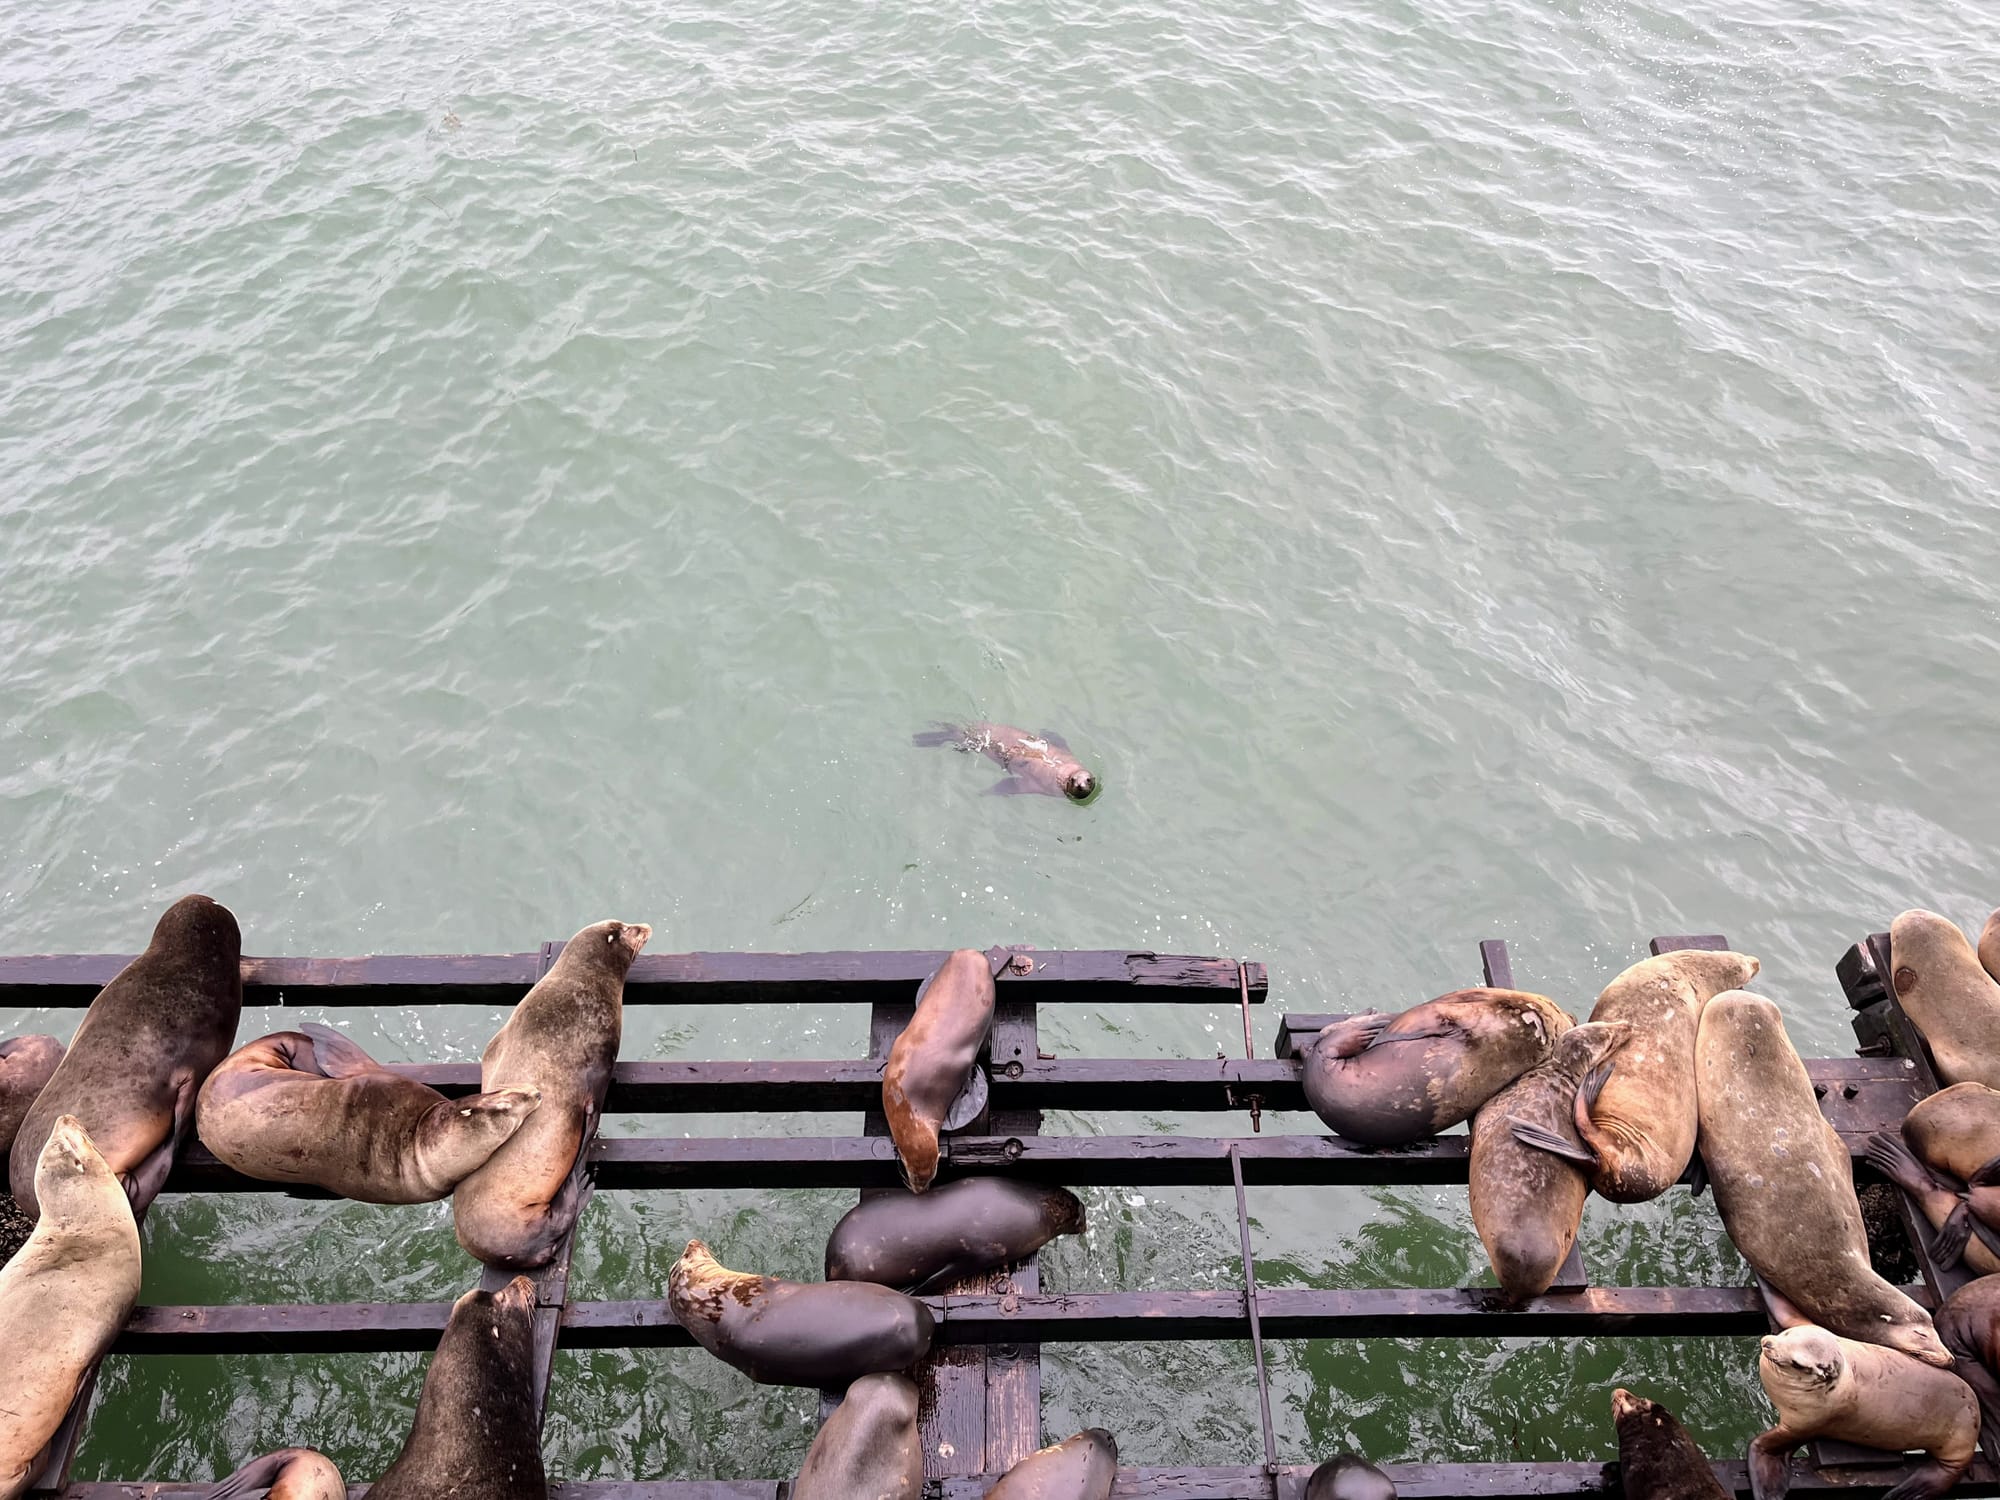 Sea lions lay on planks of wood beside a wharf. A sea lion pup swims in the water.